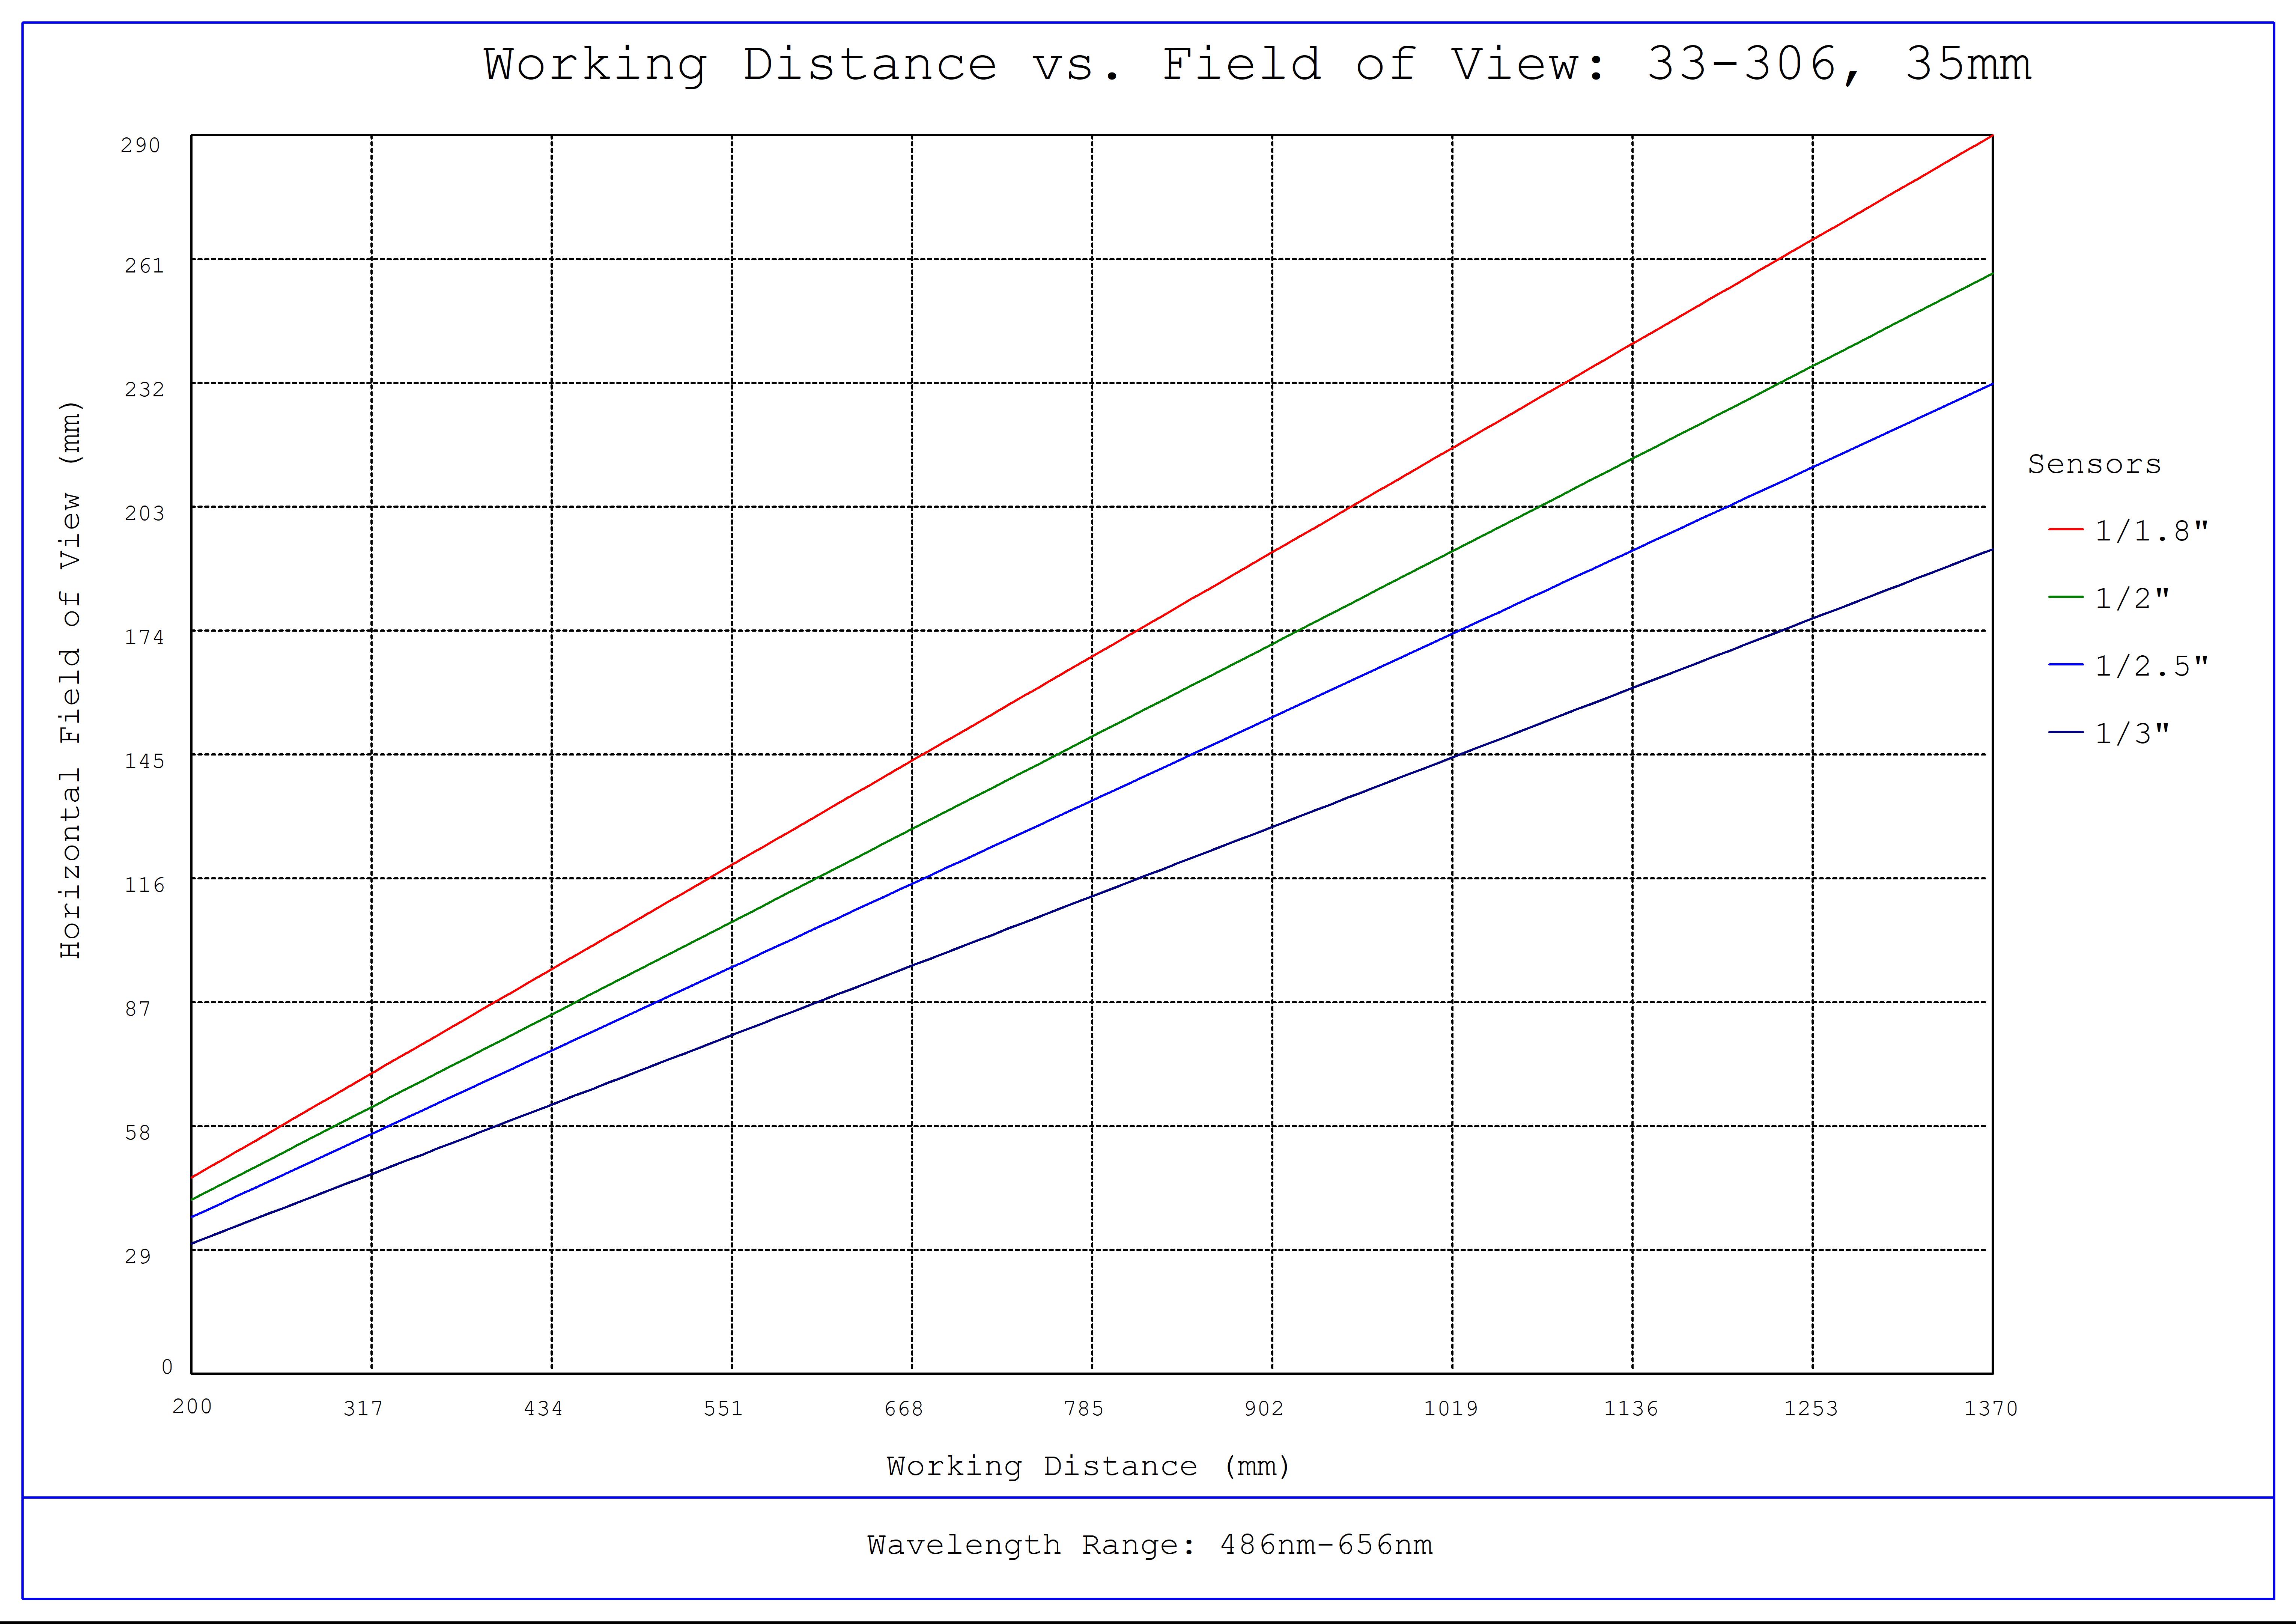 #33-306, 35mm UC Series Fixed Focal Length Lens, Working Distance versus Field of View Plot